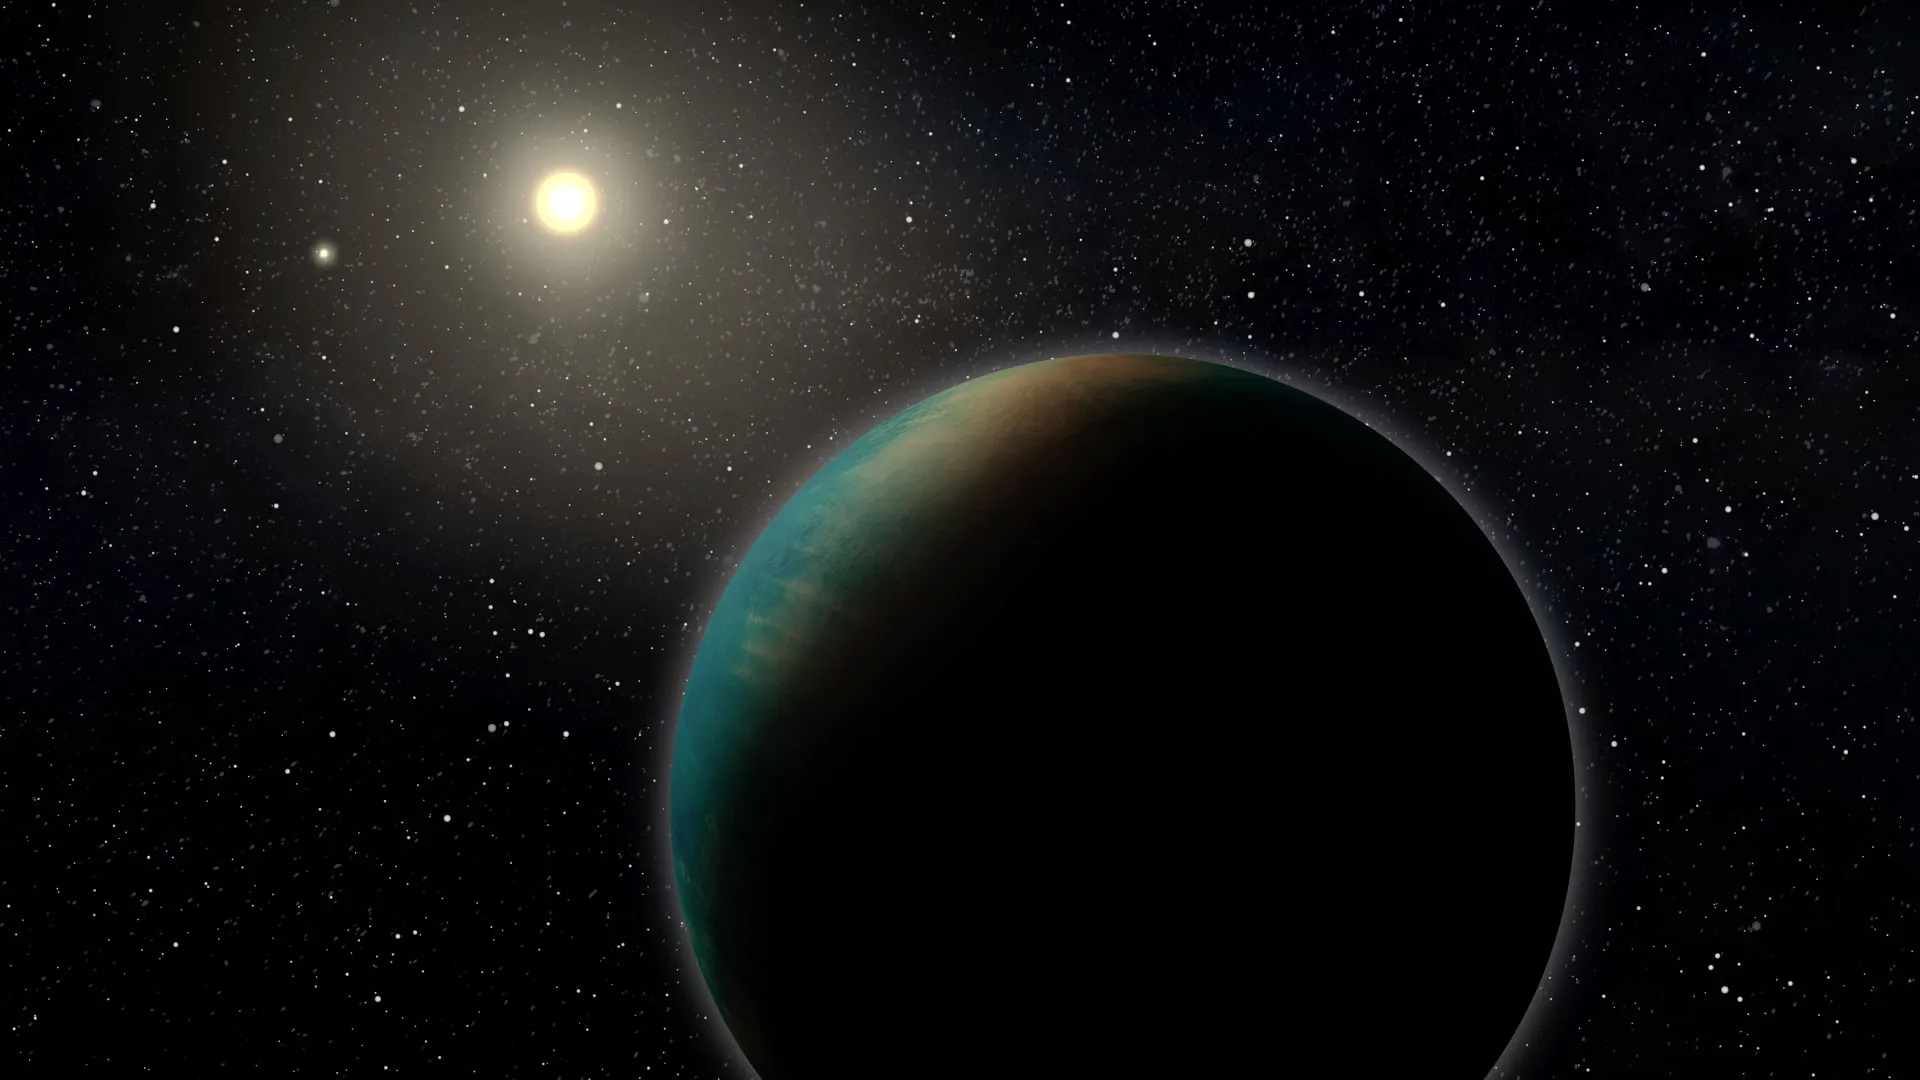 Astronomers Find a Waterworld Planet With Deep Oceans in the Habitable Zone